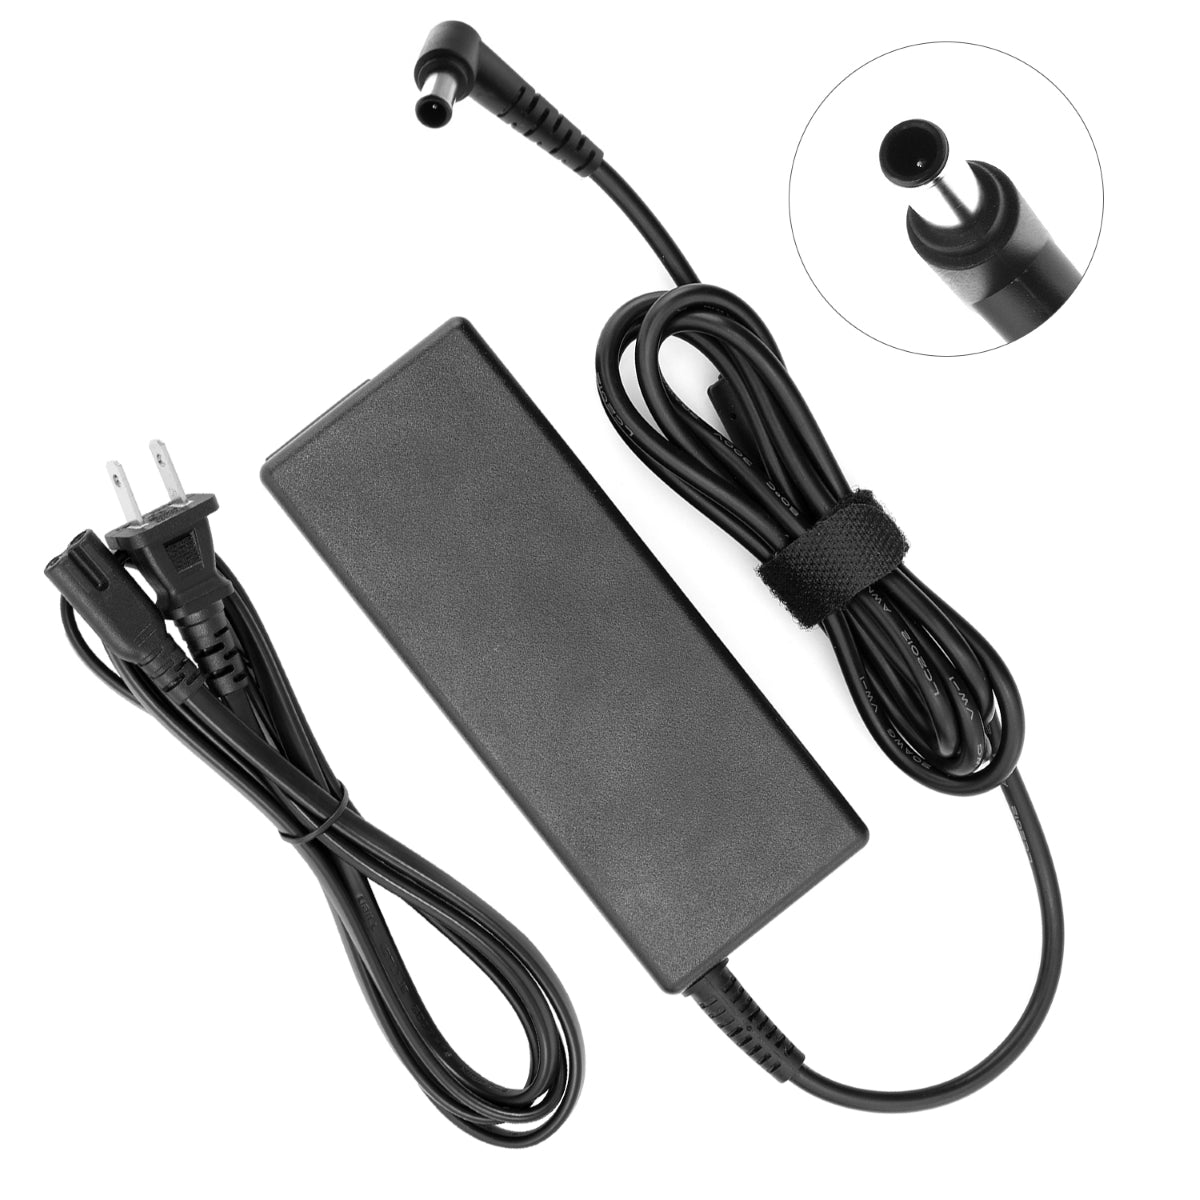 AC Adapter Power Supply for Samsung UE22F5410 TV Display